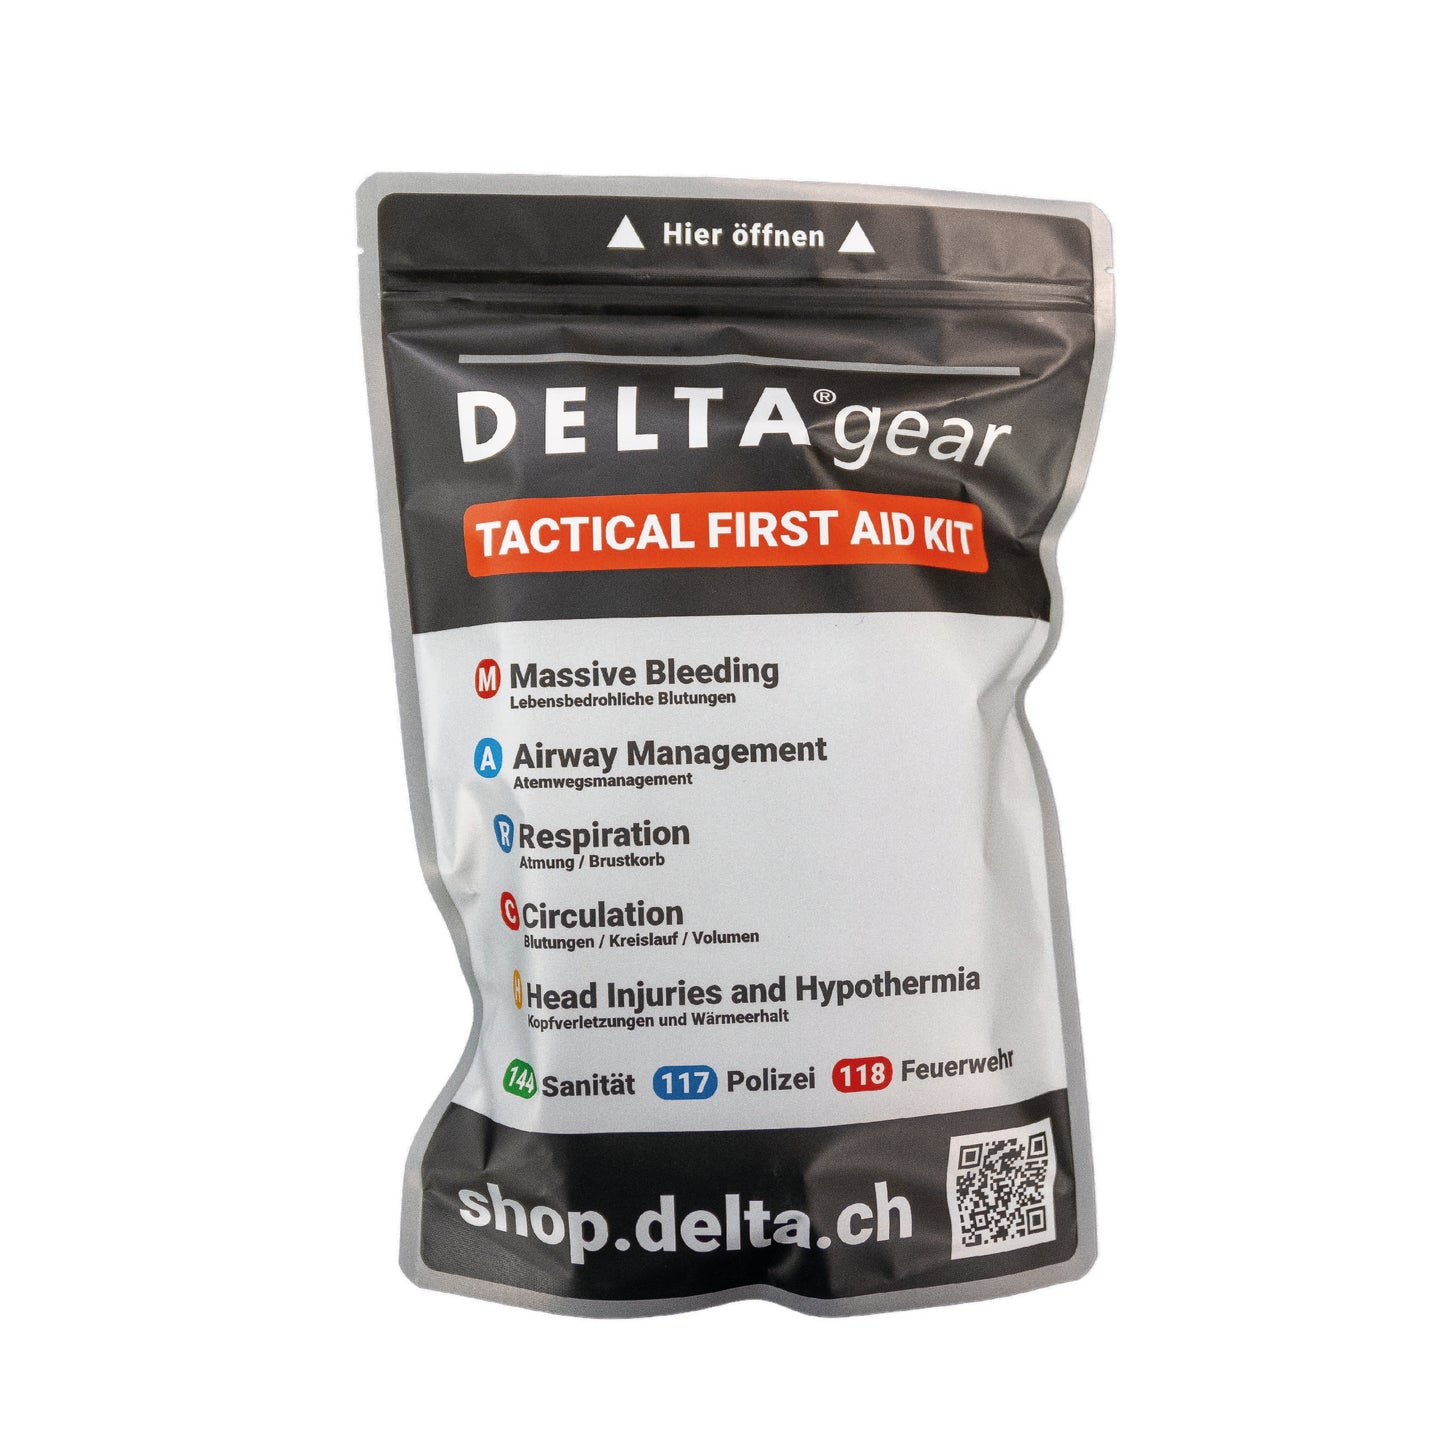 DELTAgear Tactical First Aid Kit